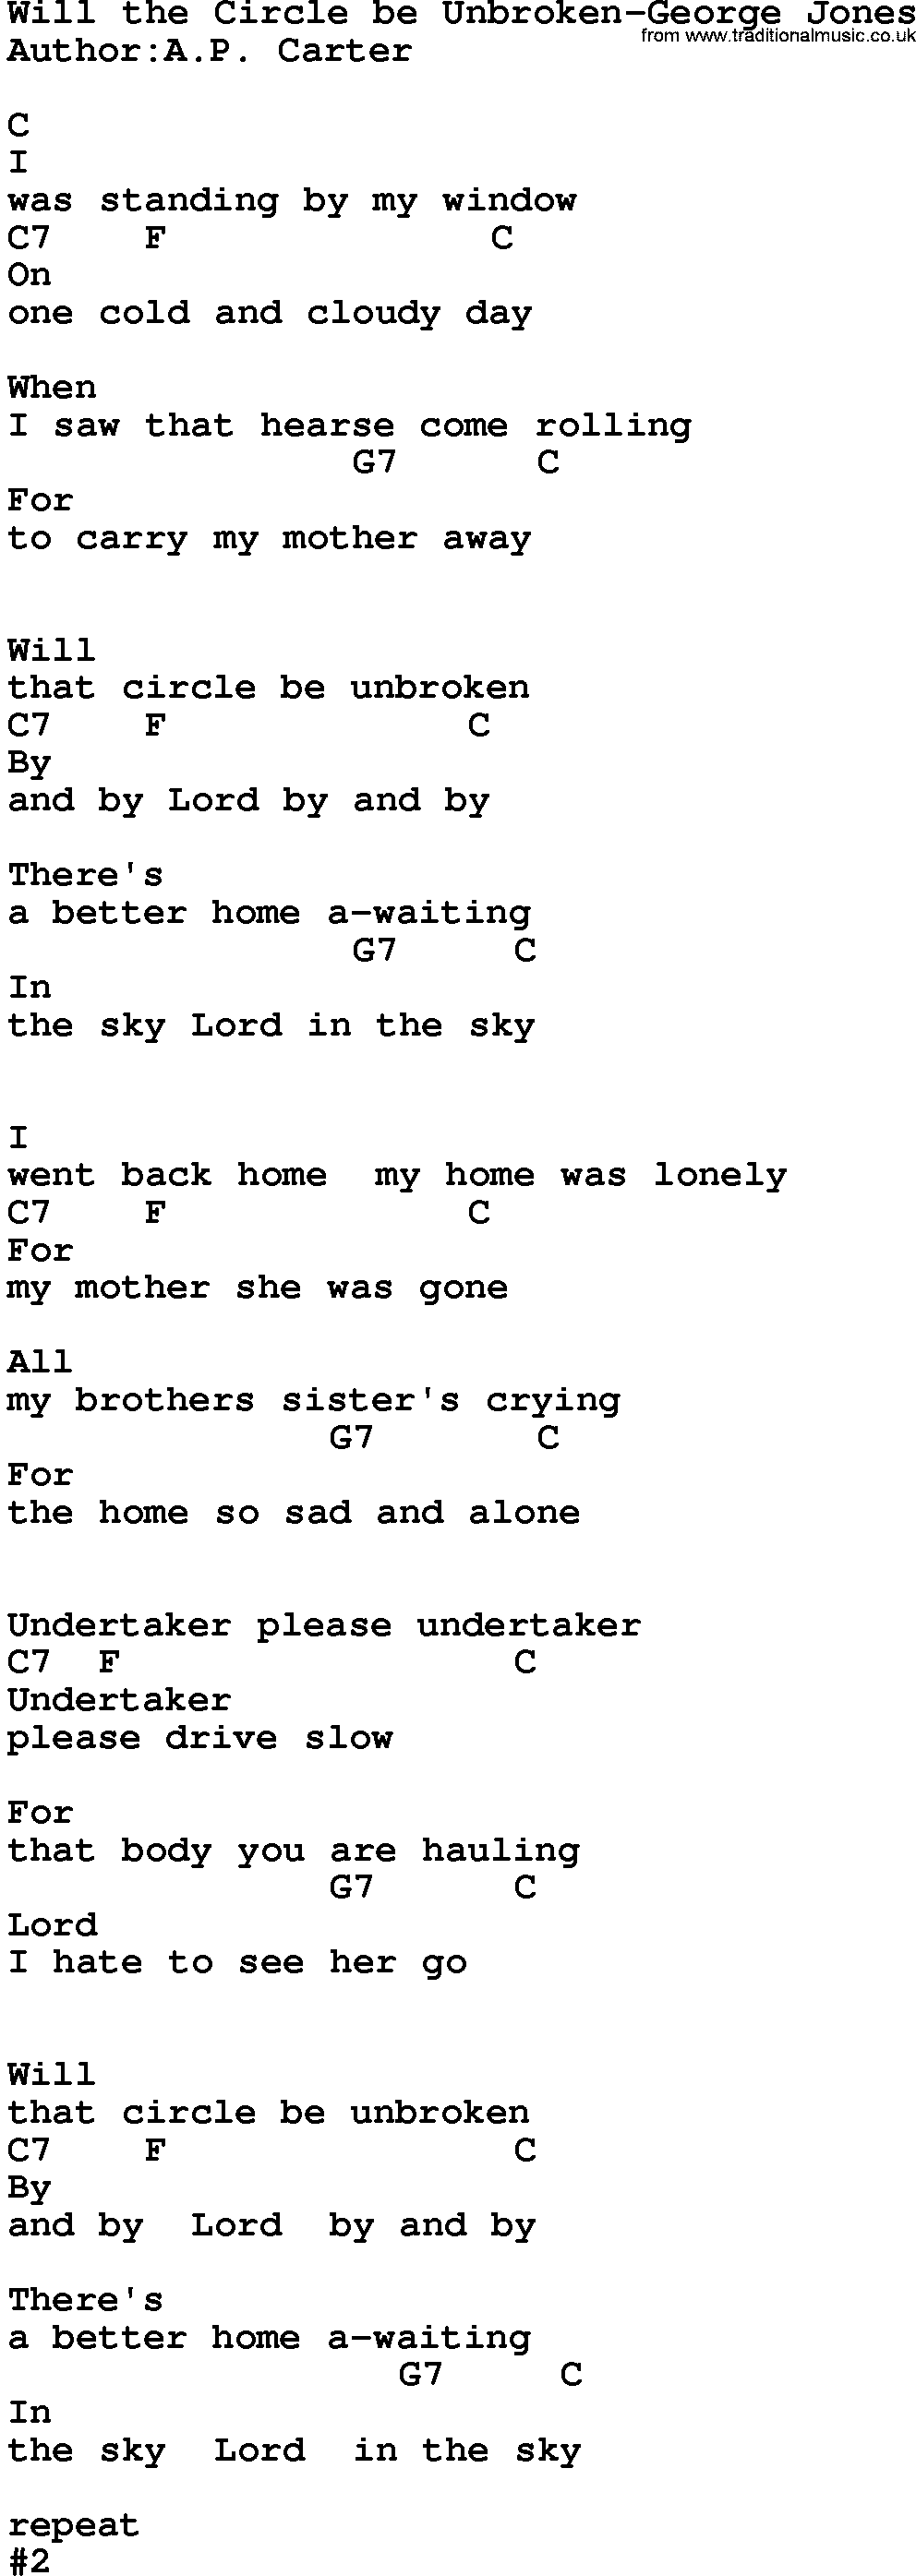 Country music song: Will The Circle Be Unbroken-George Jones lyrics and chords